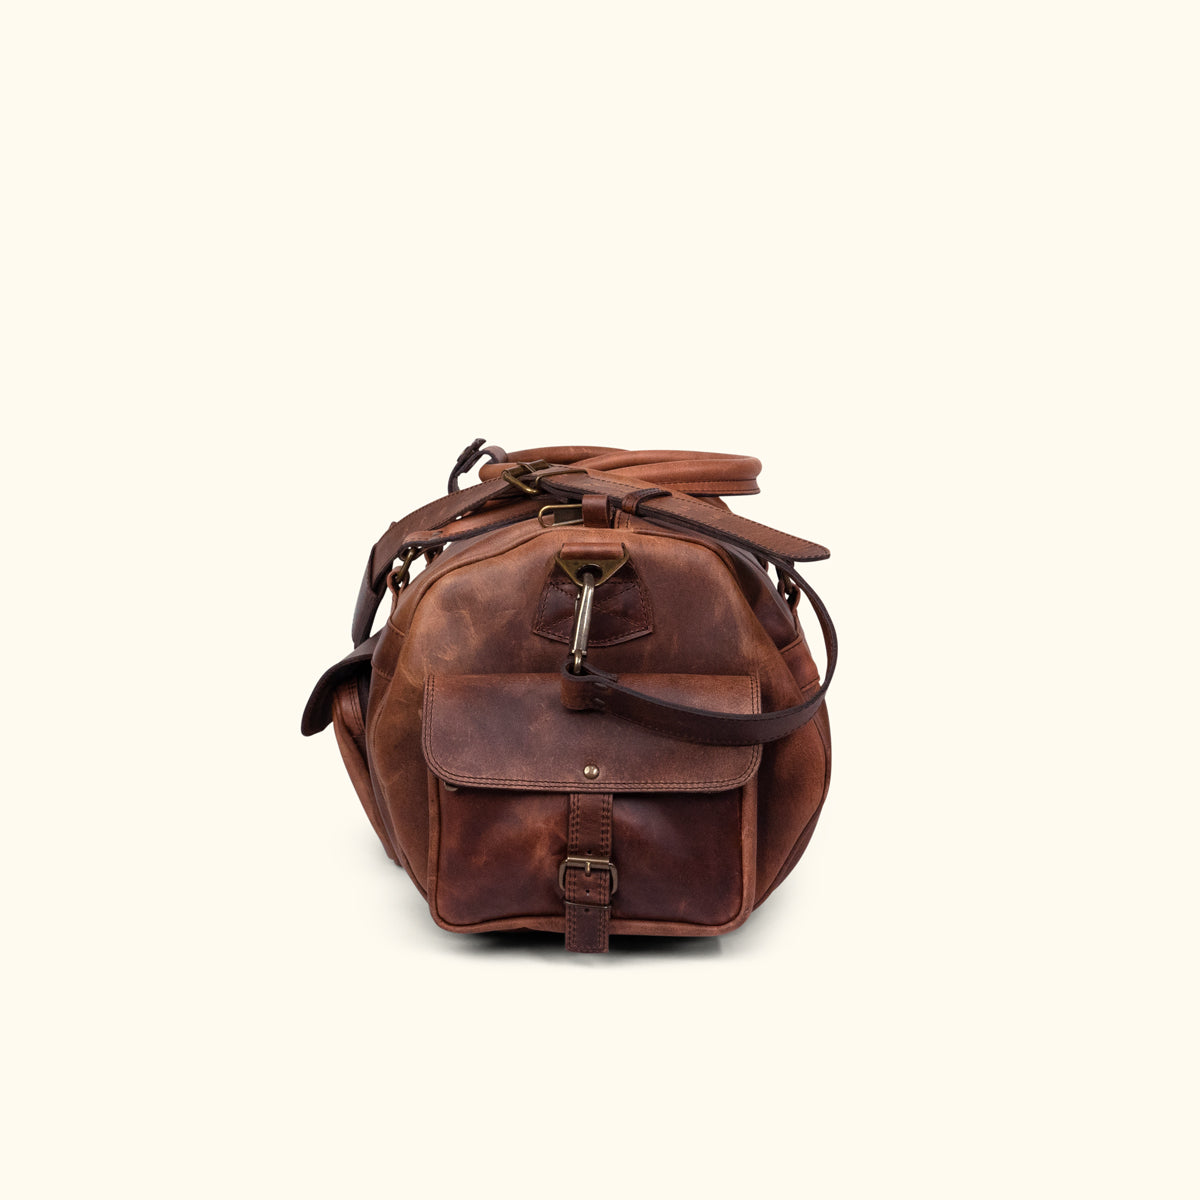 Roosevelt Small Leather Duffle Bag in Dark Oak - Hands On